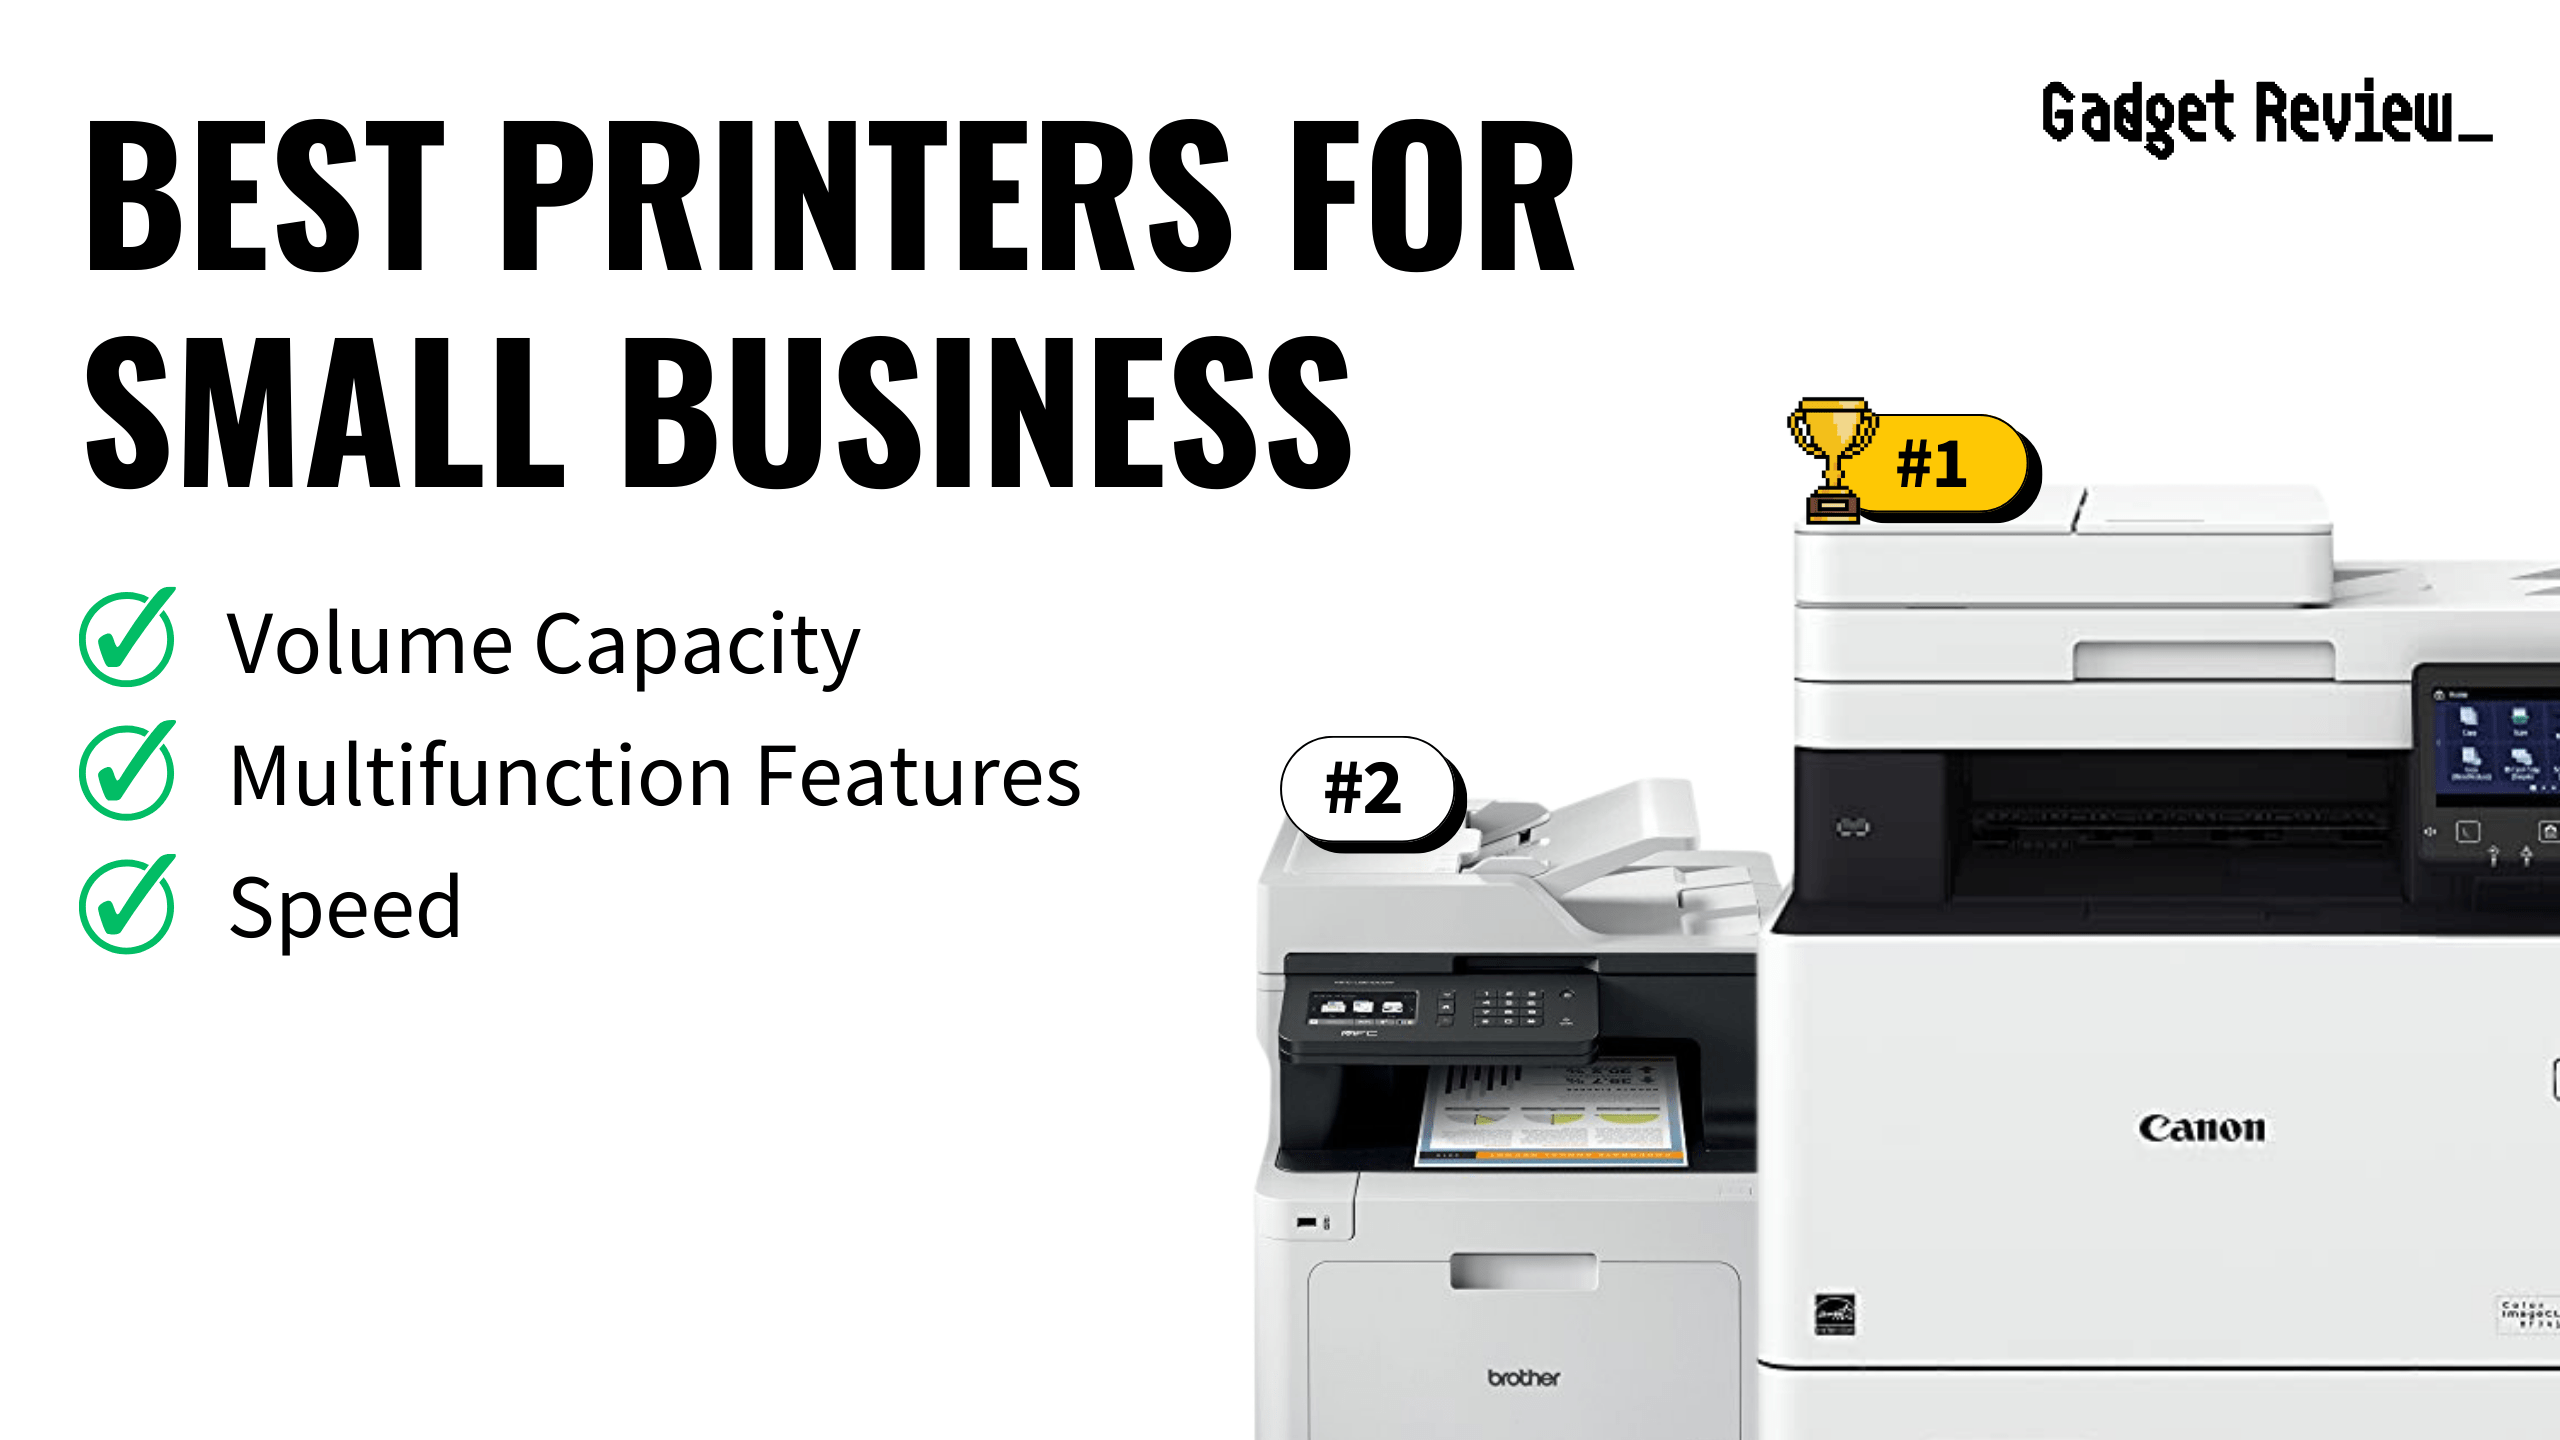 Best Printers for Small Business